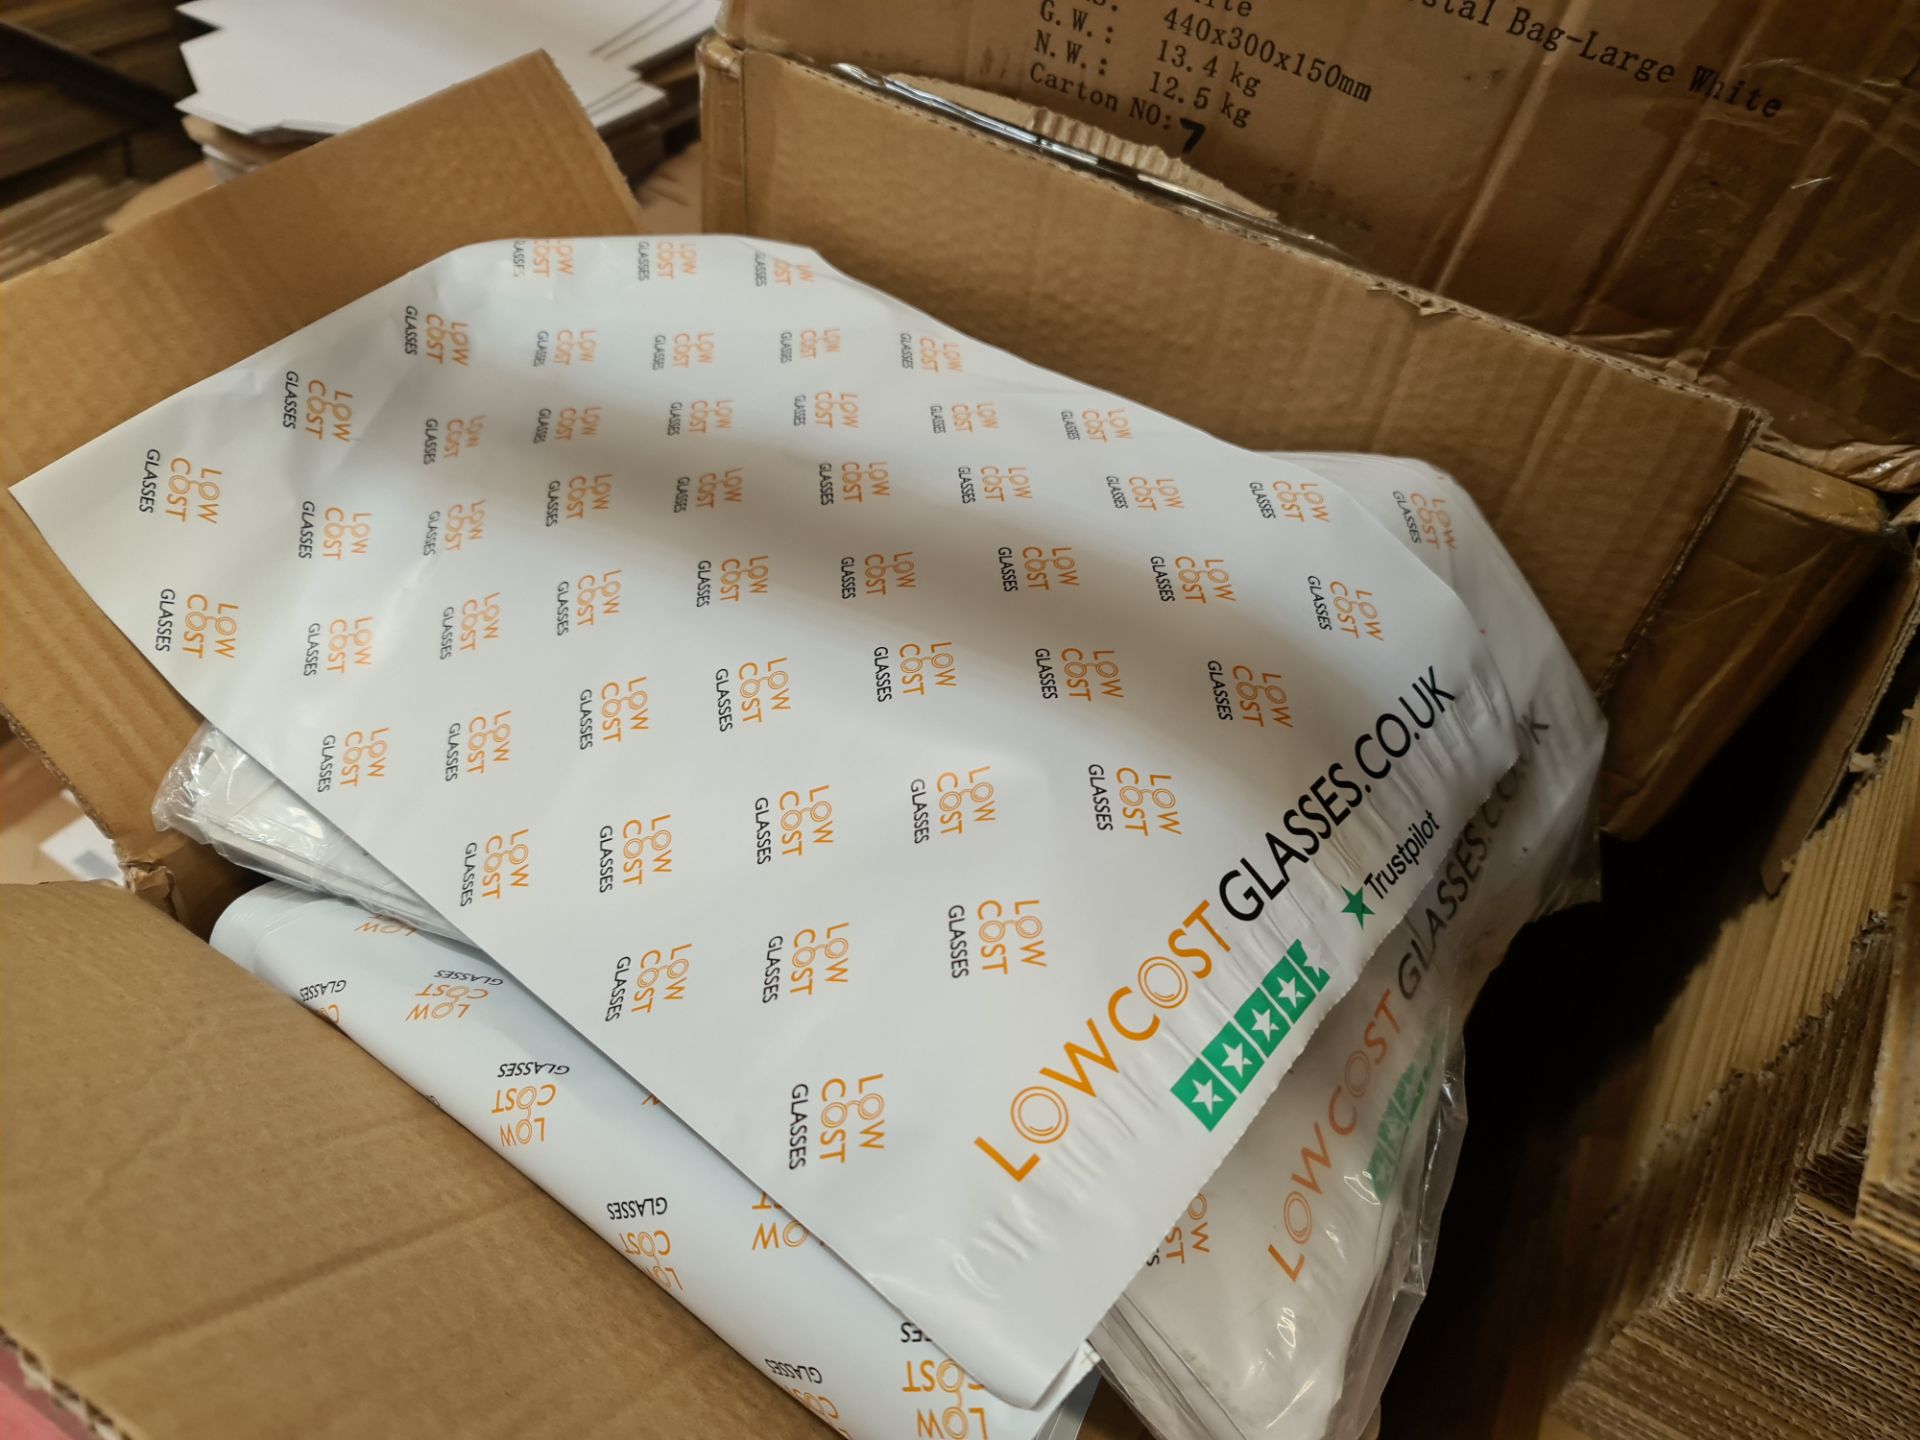 Large quantity of self-seal bags comprising approx. 21 boxes, each box containing 2,000 bags - assor